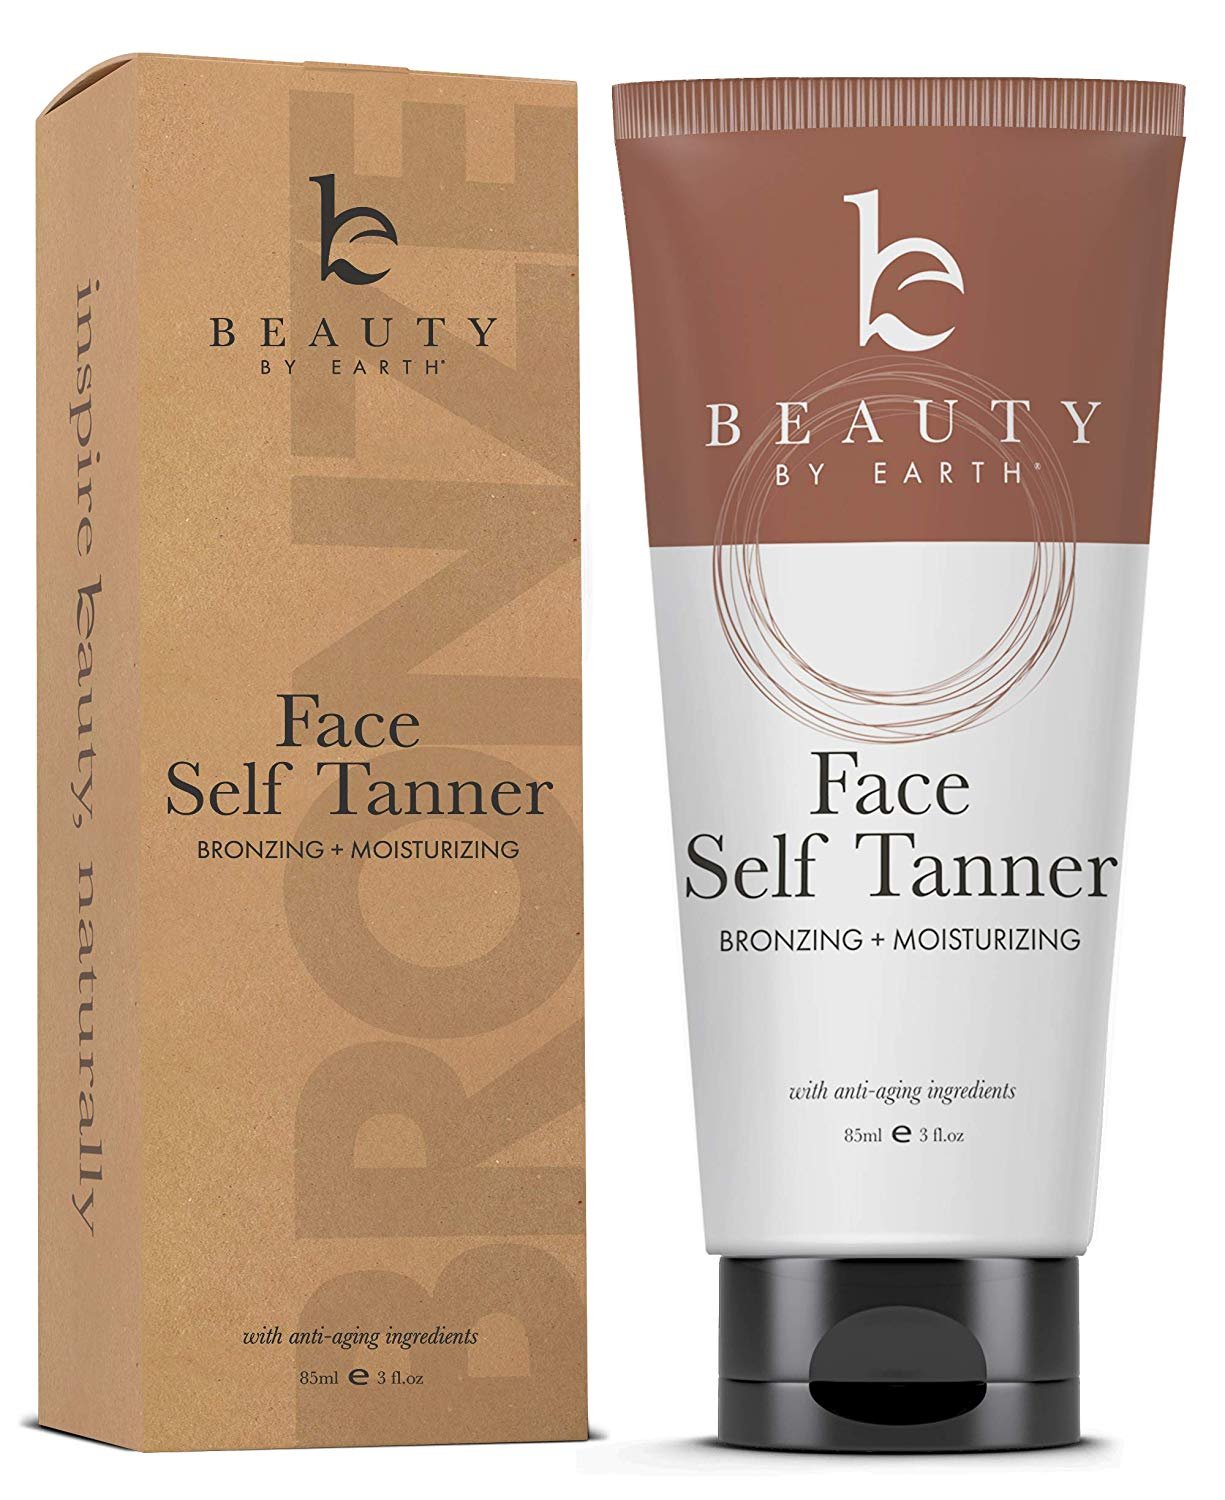 Beauty by Earth Self Tanner for Face with Organic & Natural Ingredients, Sunless Fake Tanning Lotion Fair to Medium - image 1 of 4